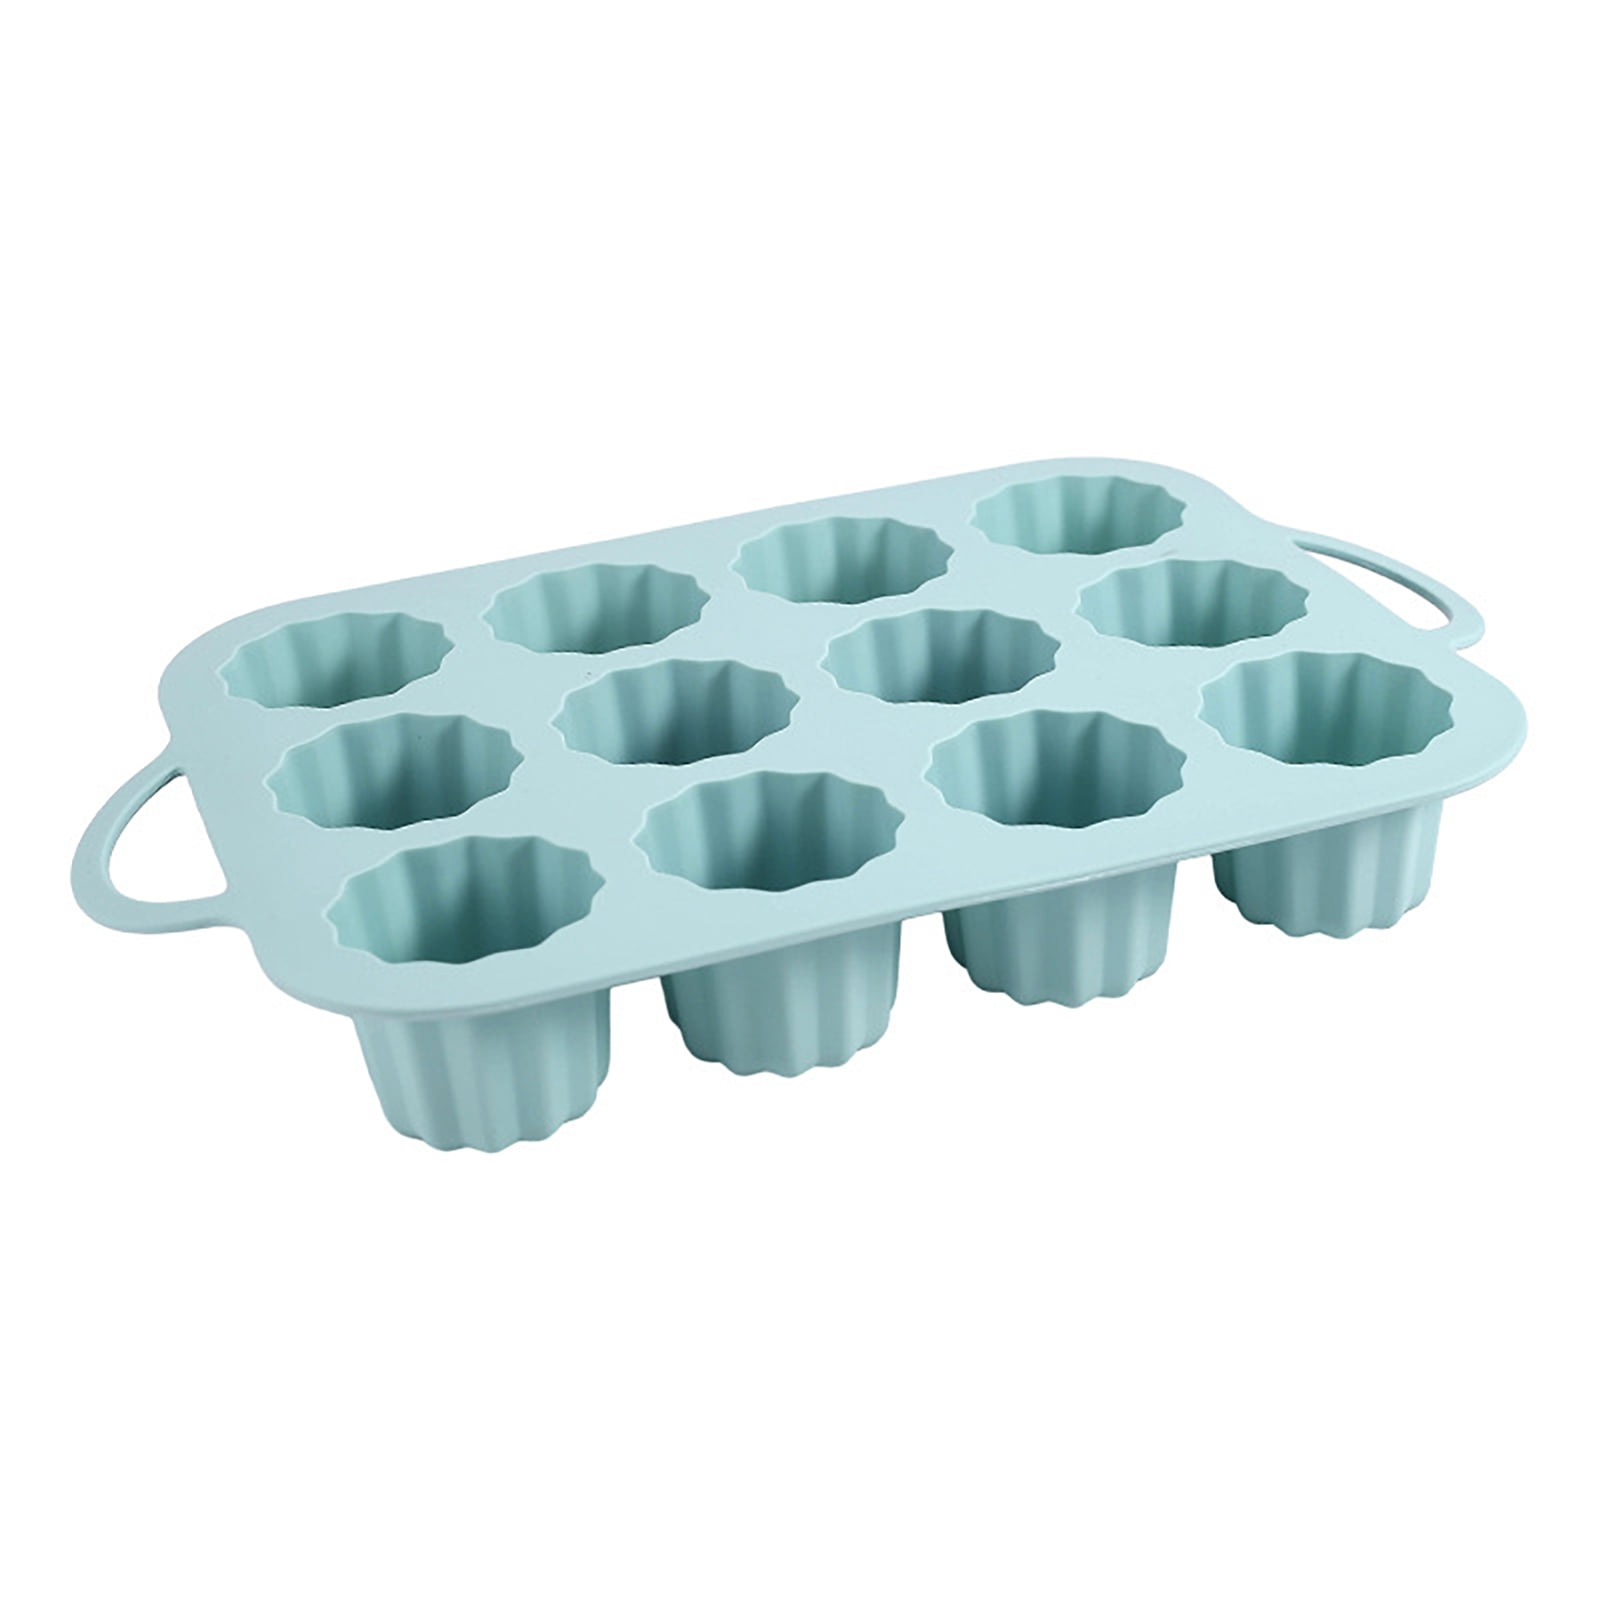 12 Cavities Silicone Muffin Pan Small Cylindrical Jelly Mold Non